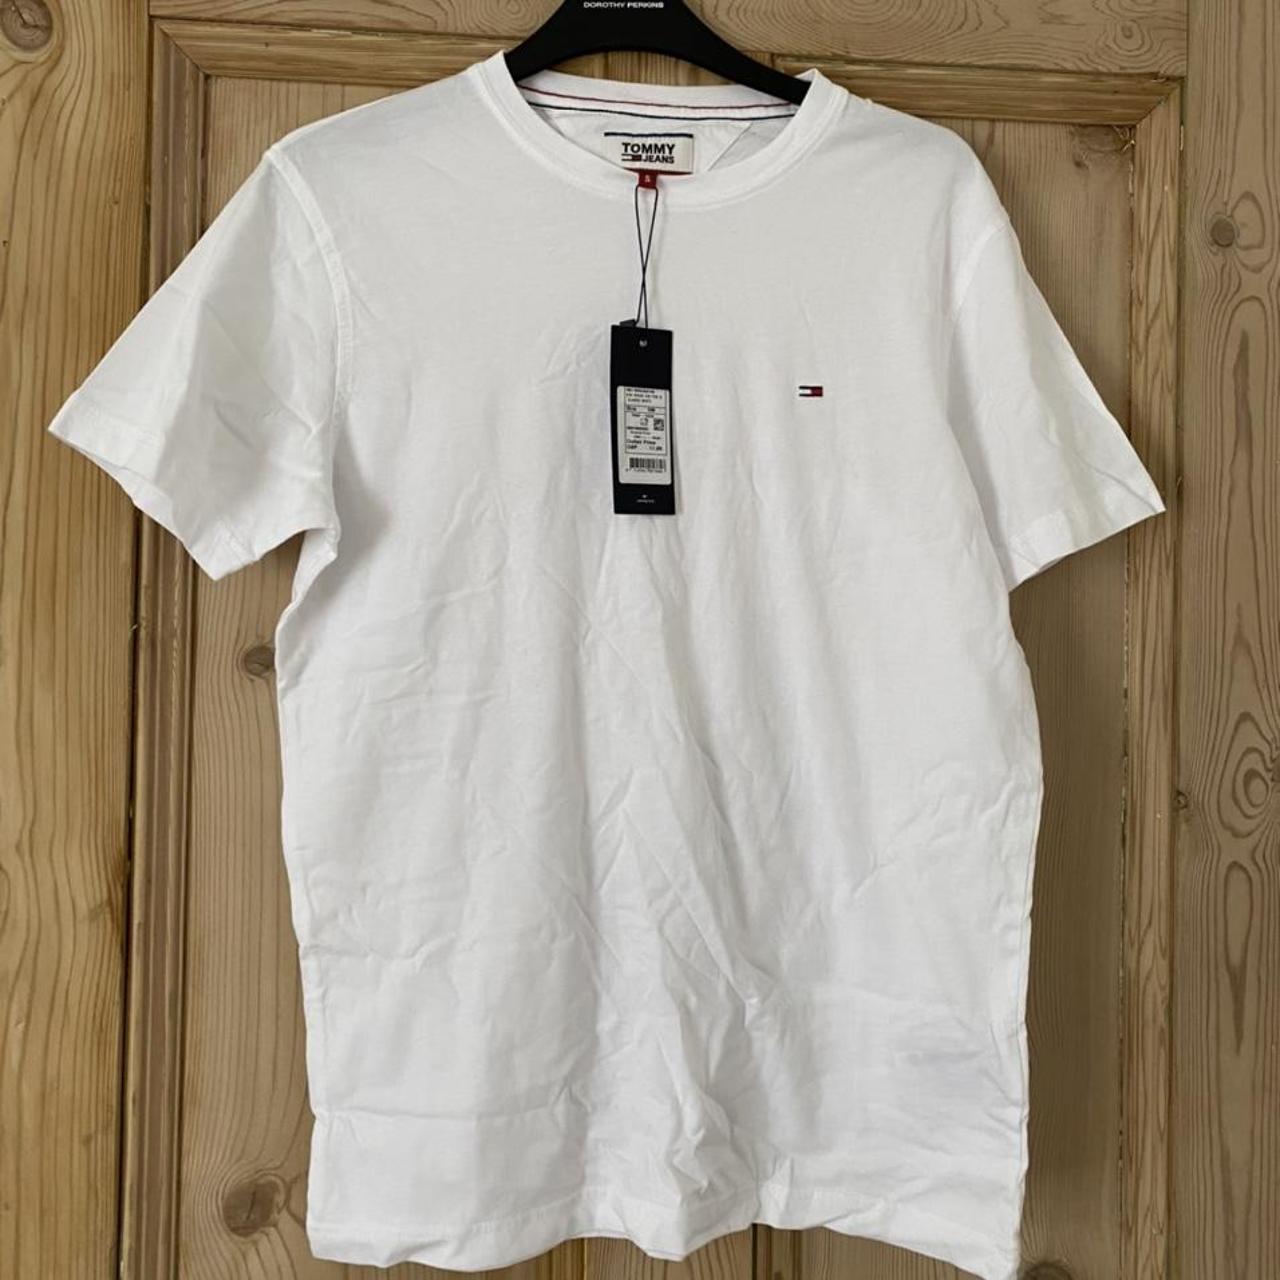 Tommy Hilfiger white tshirt Size s/m Brand new with... - Depop